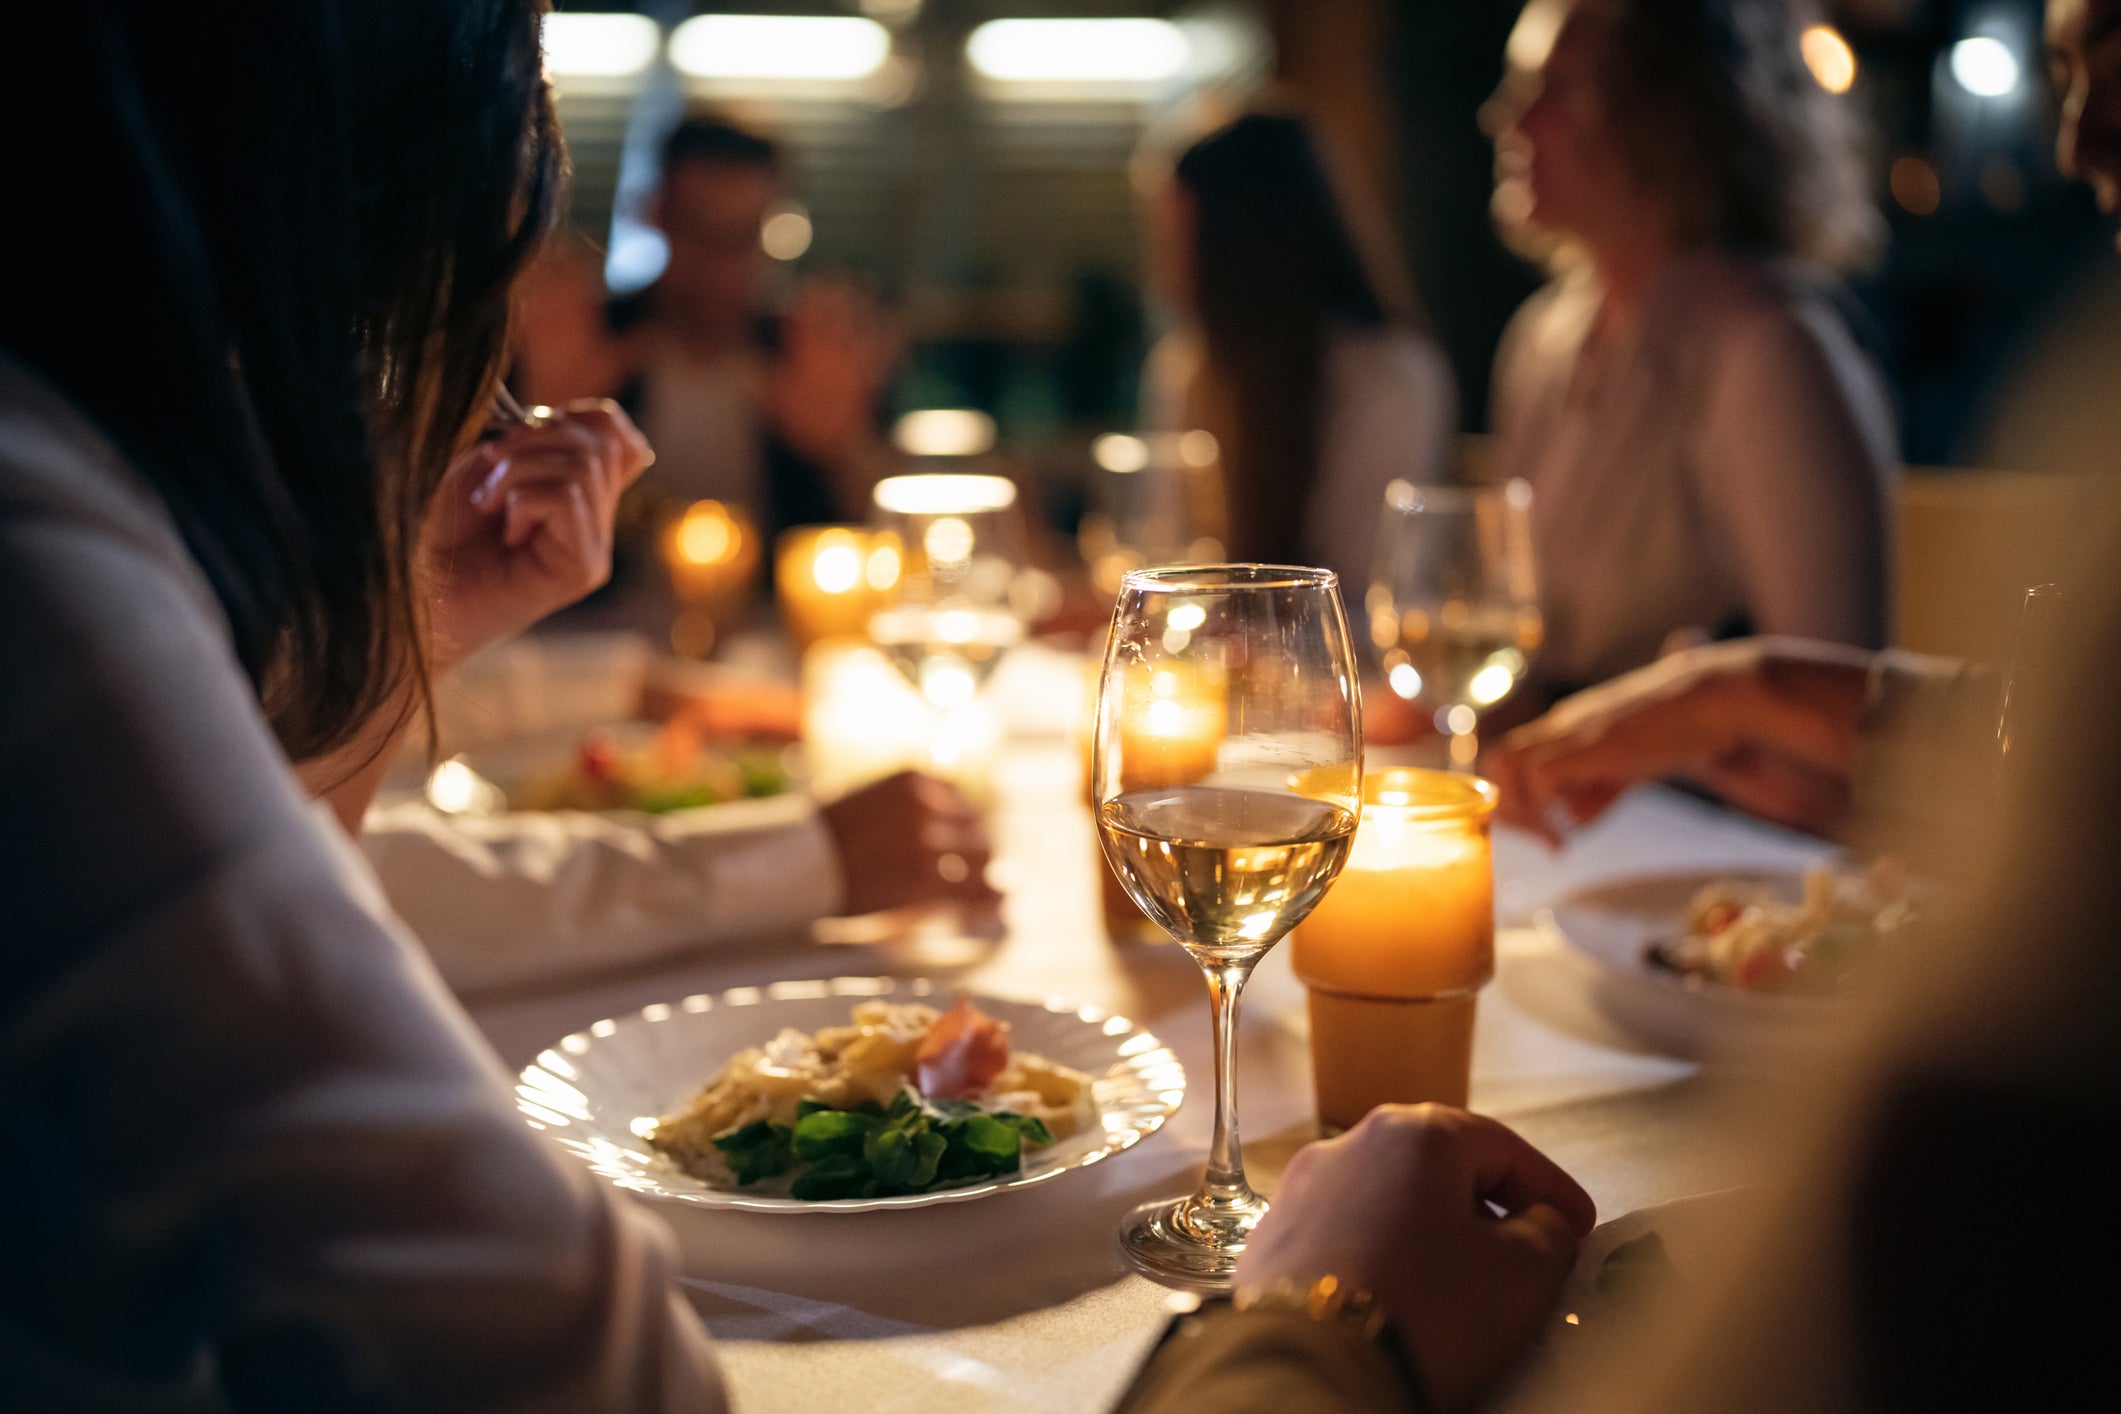 Dinner guests charged by hosts for meal after the fact